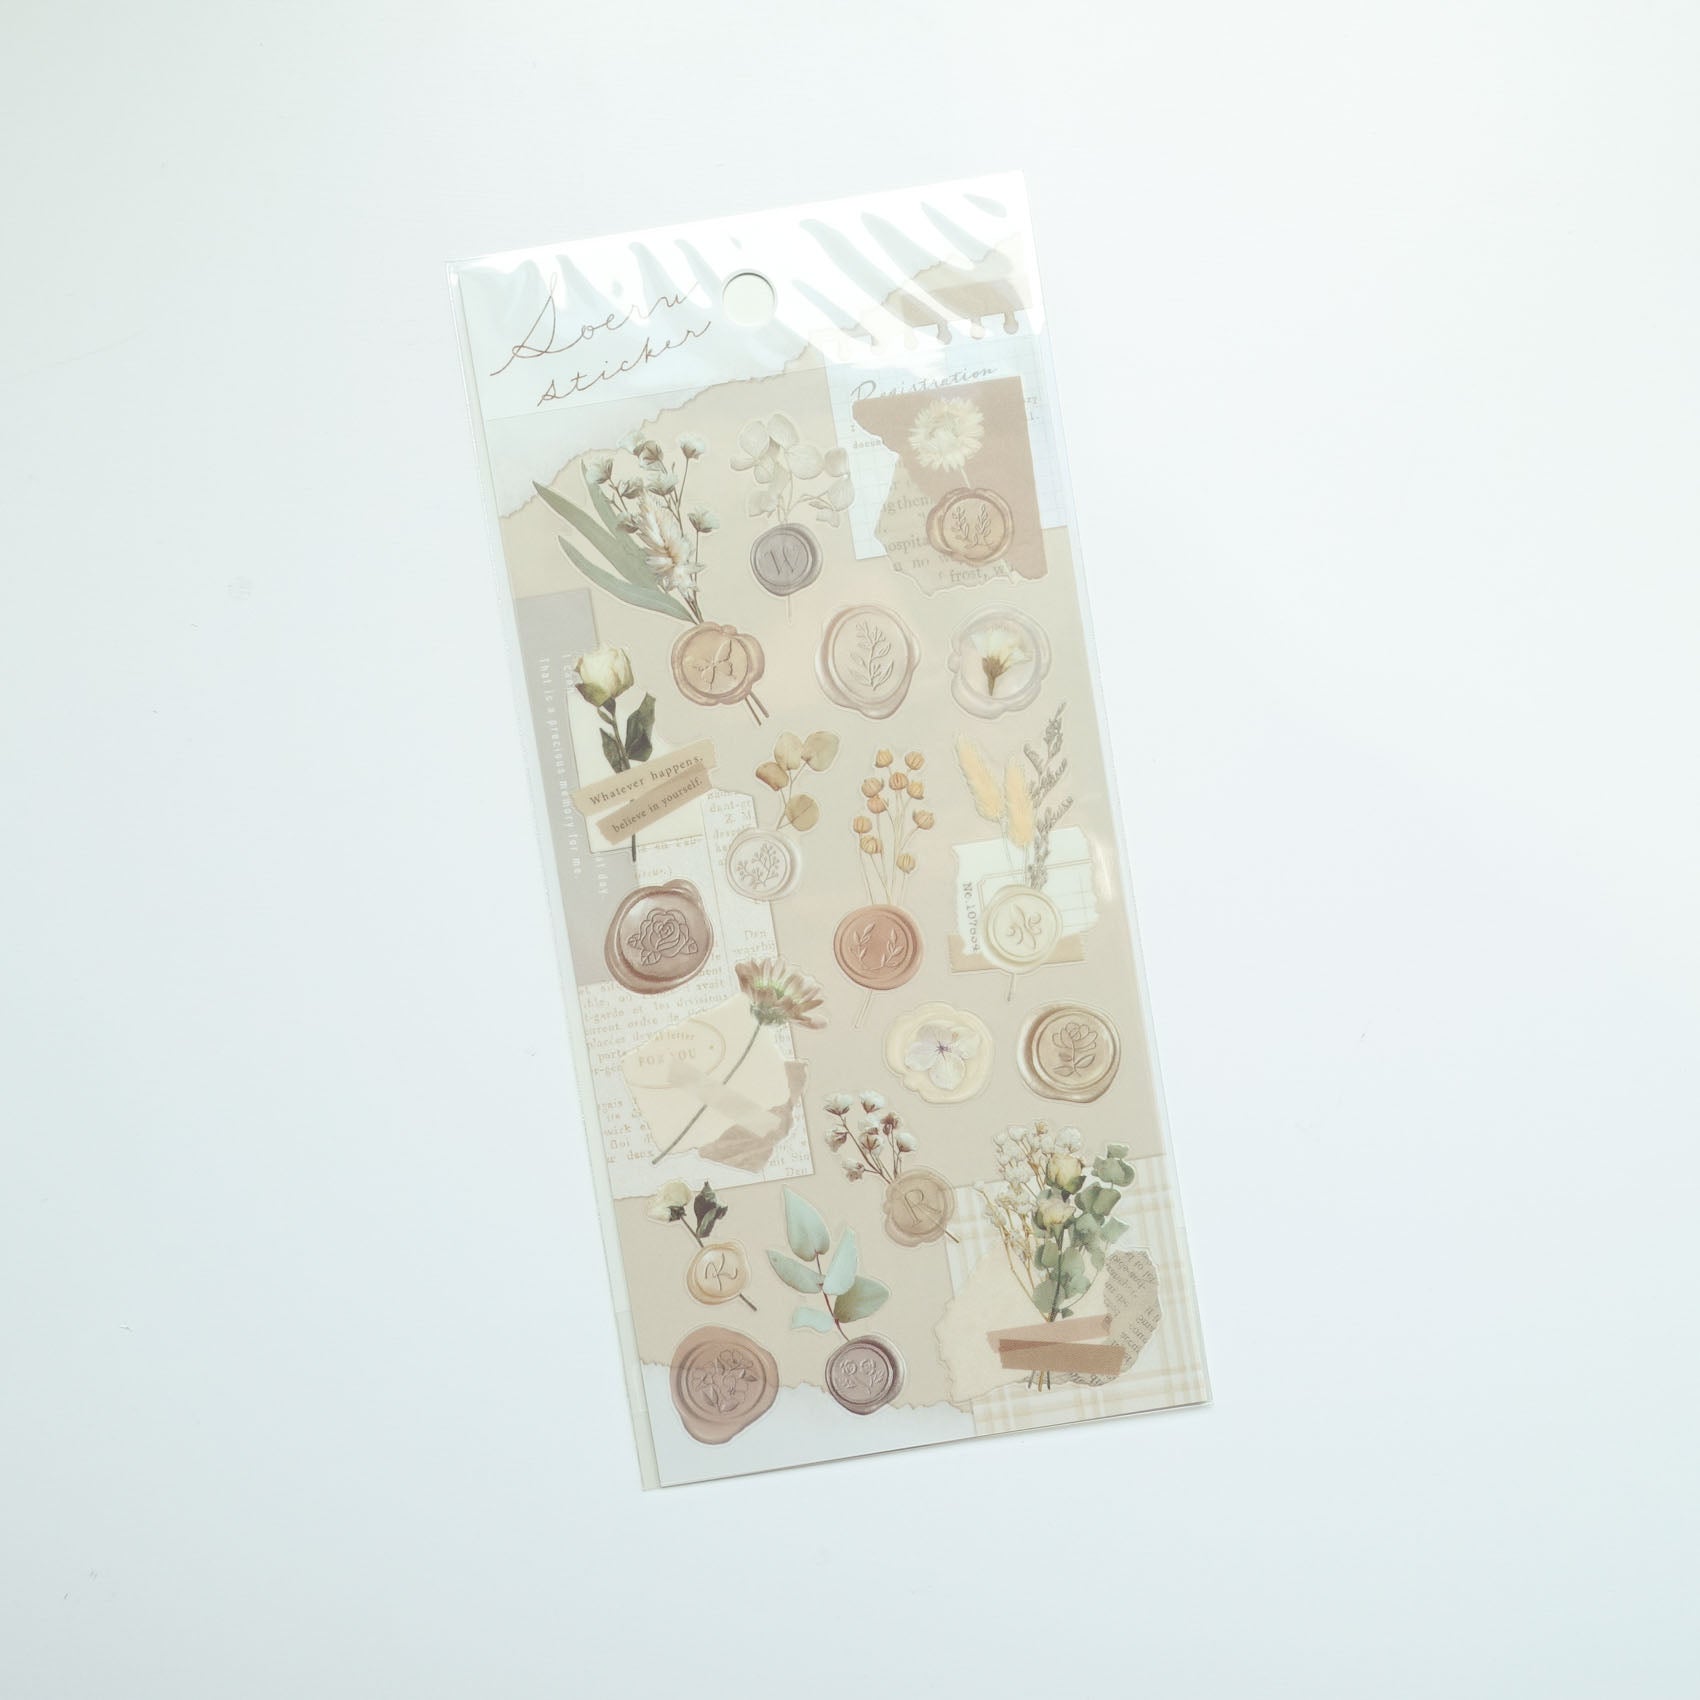 Soeru Sticker Sheet with Floral Wax Seal Pictures - Ivory